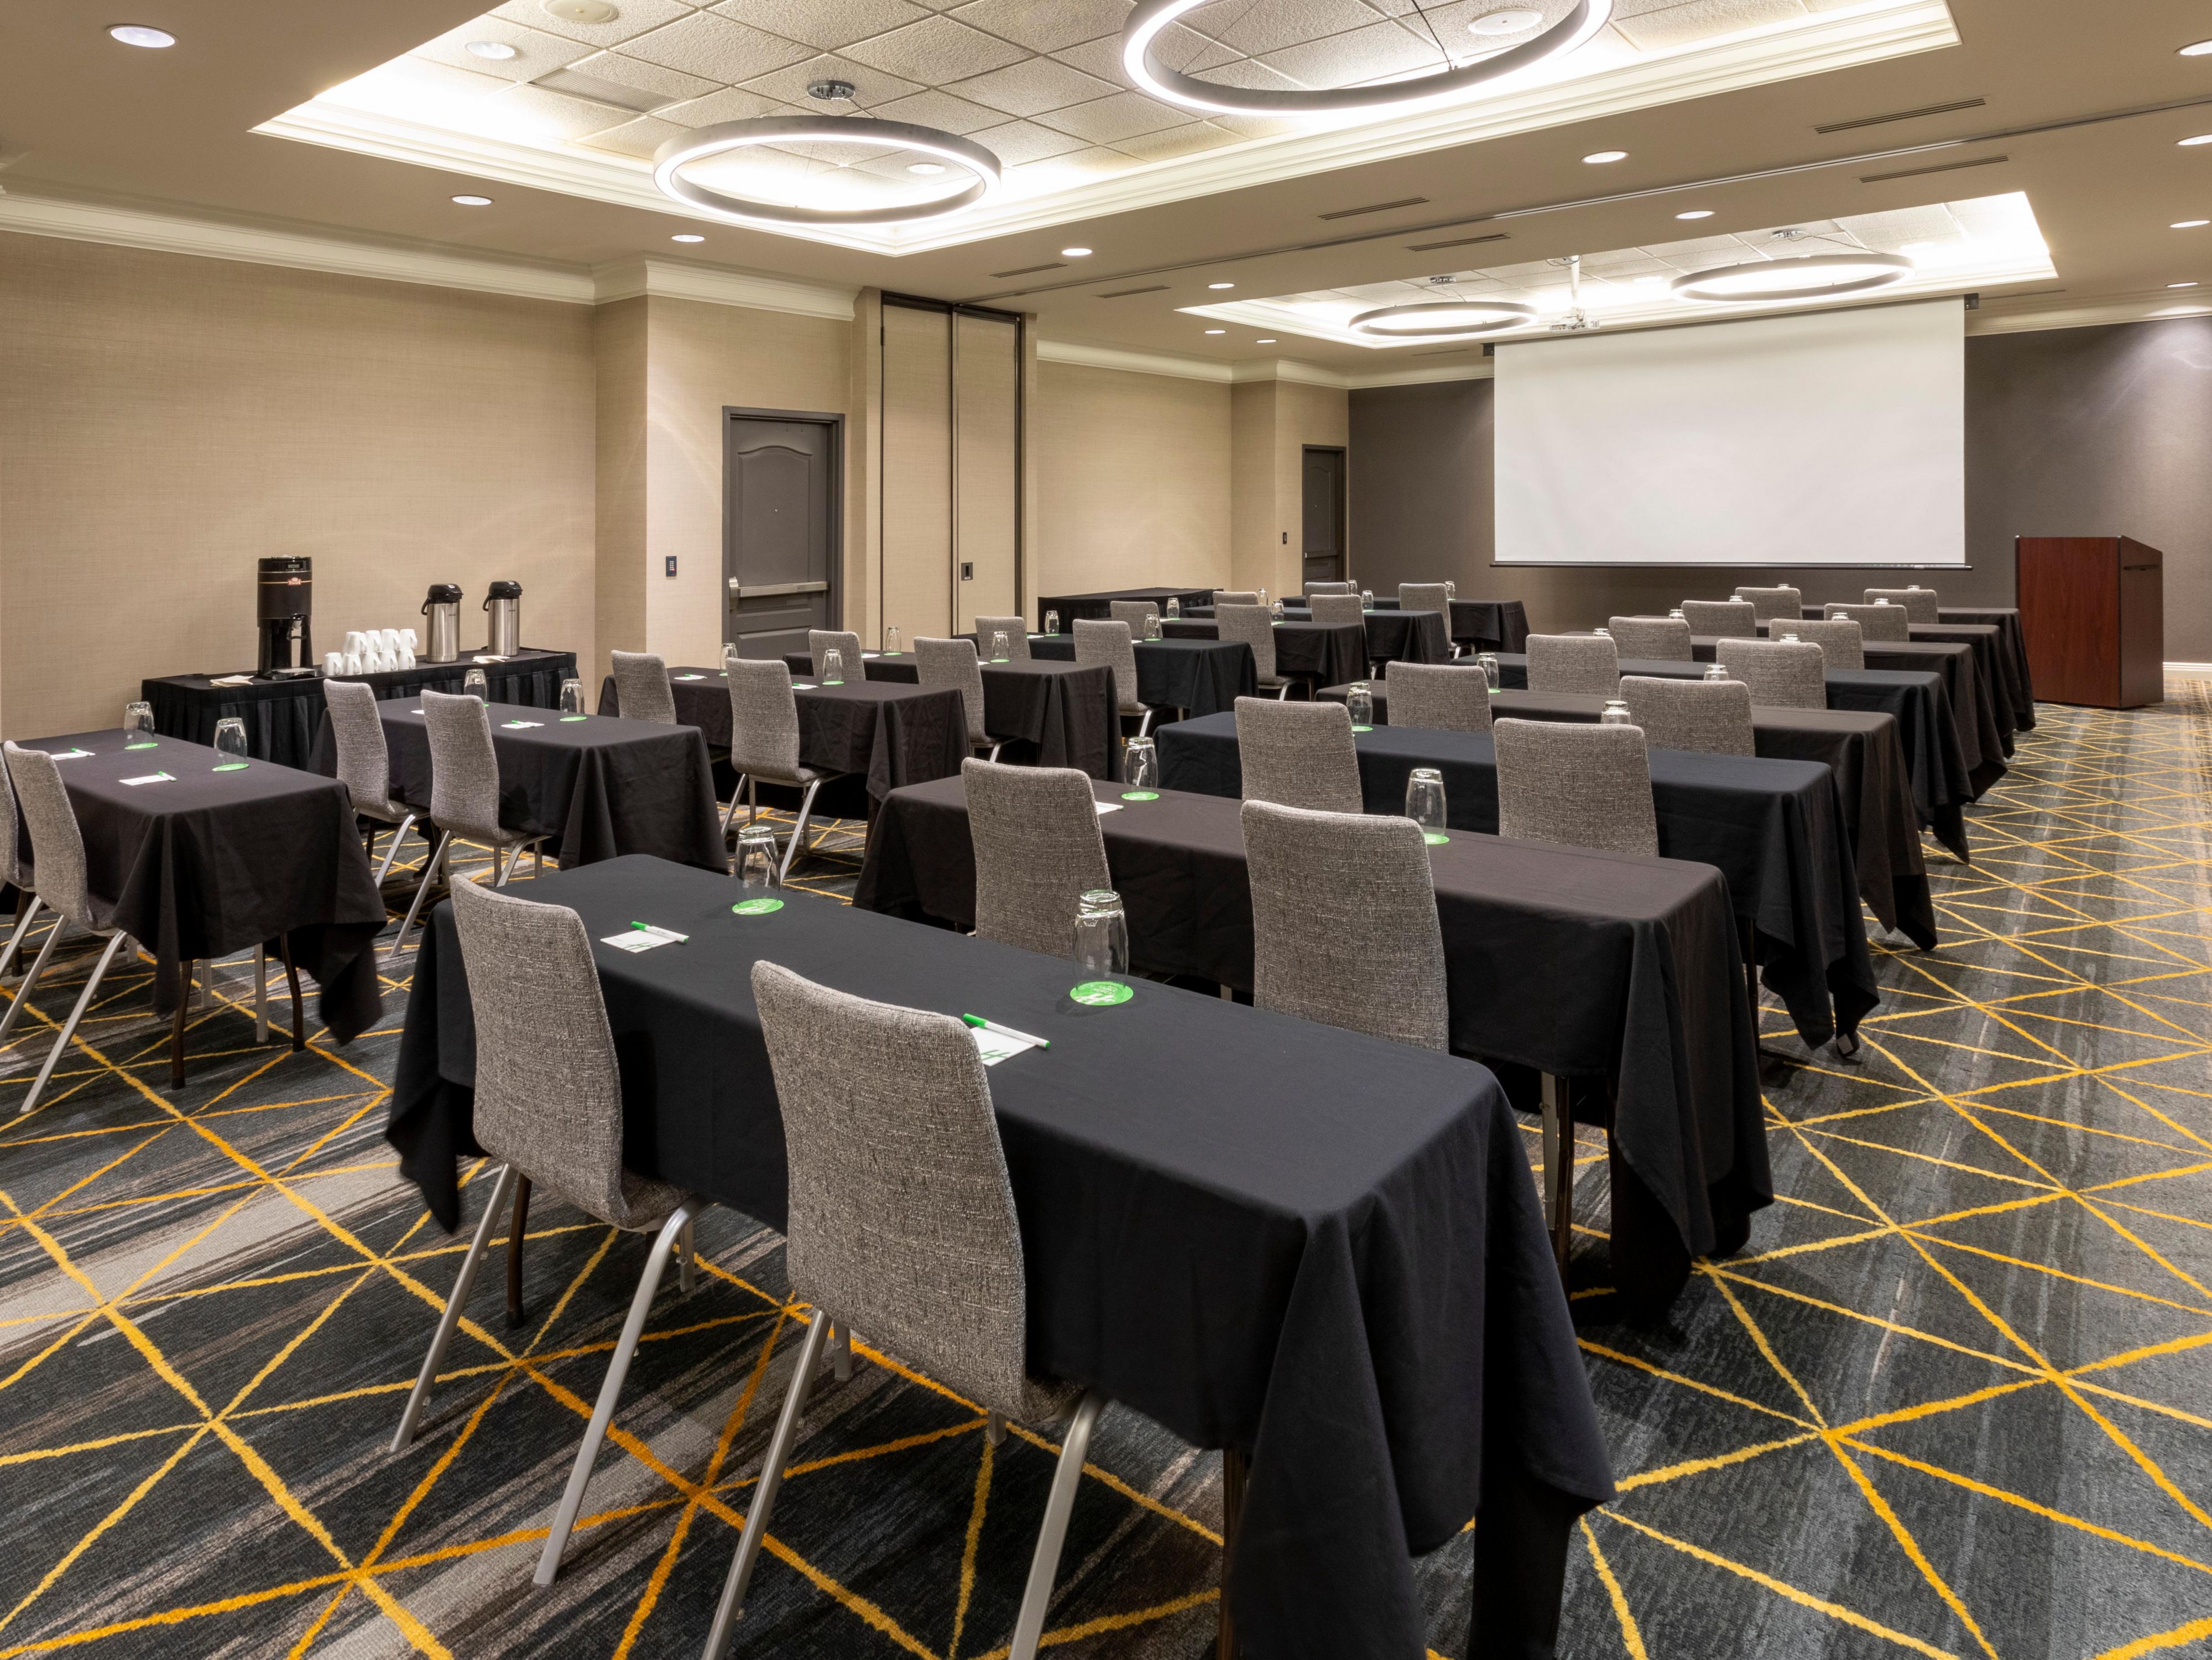 Our deluxe Maple Grove, MN hotel features over 1,900 sq. ft. of meeting space. Perfect for your next business meeting, our Naples Meeting and Banquet Facility includes audio/visual equipment and catering services to ensure the success of your event.